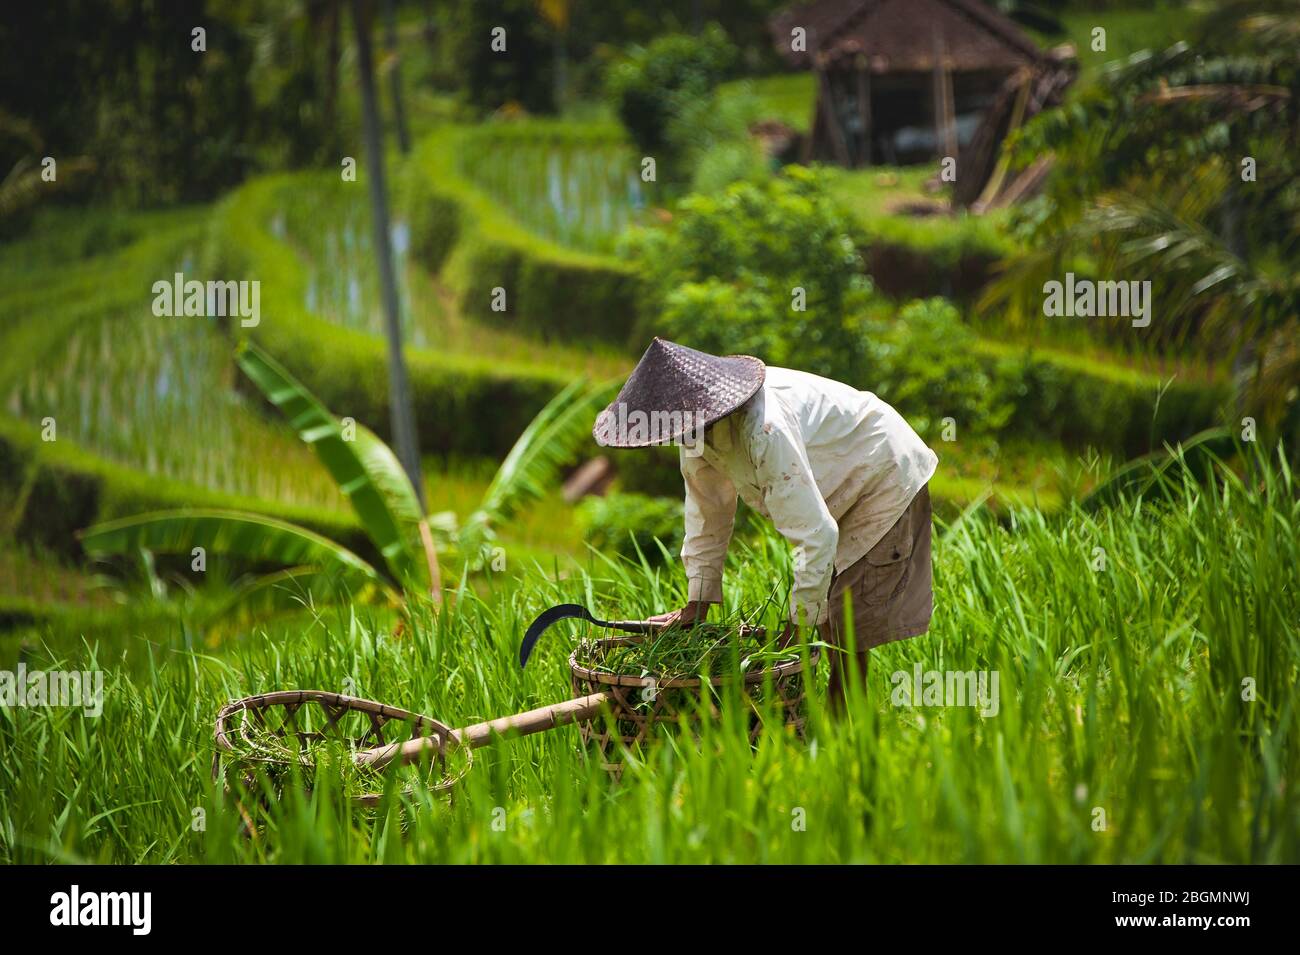 Rice farmer harvesting the crop, Jatiluwih  Rice Terraces, Bali Indonesia. Close up worker filling bamboo baskets  on sunny slopes Stock Photo